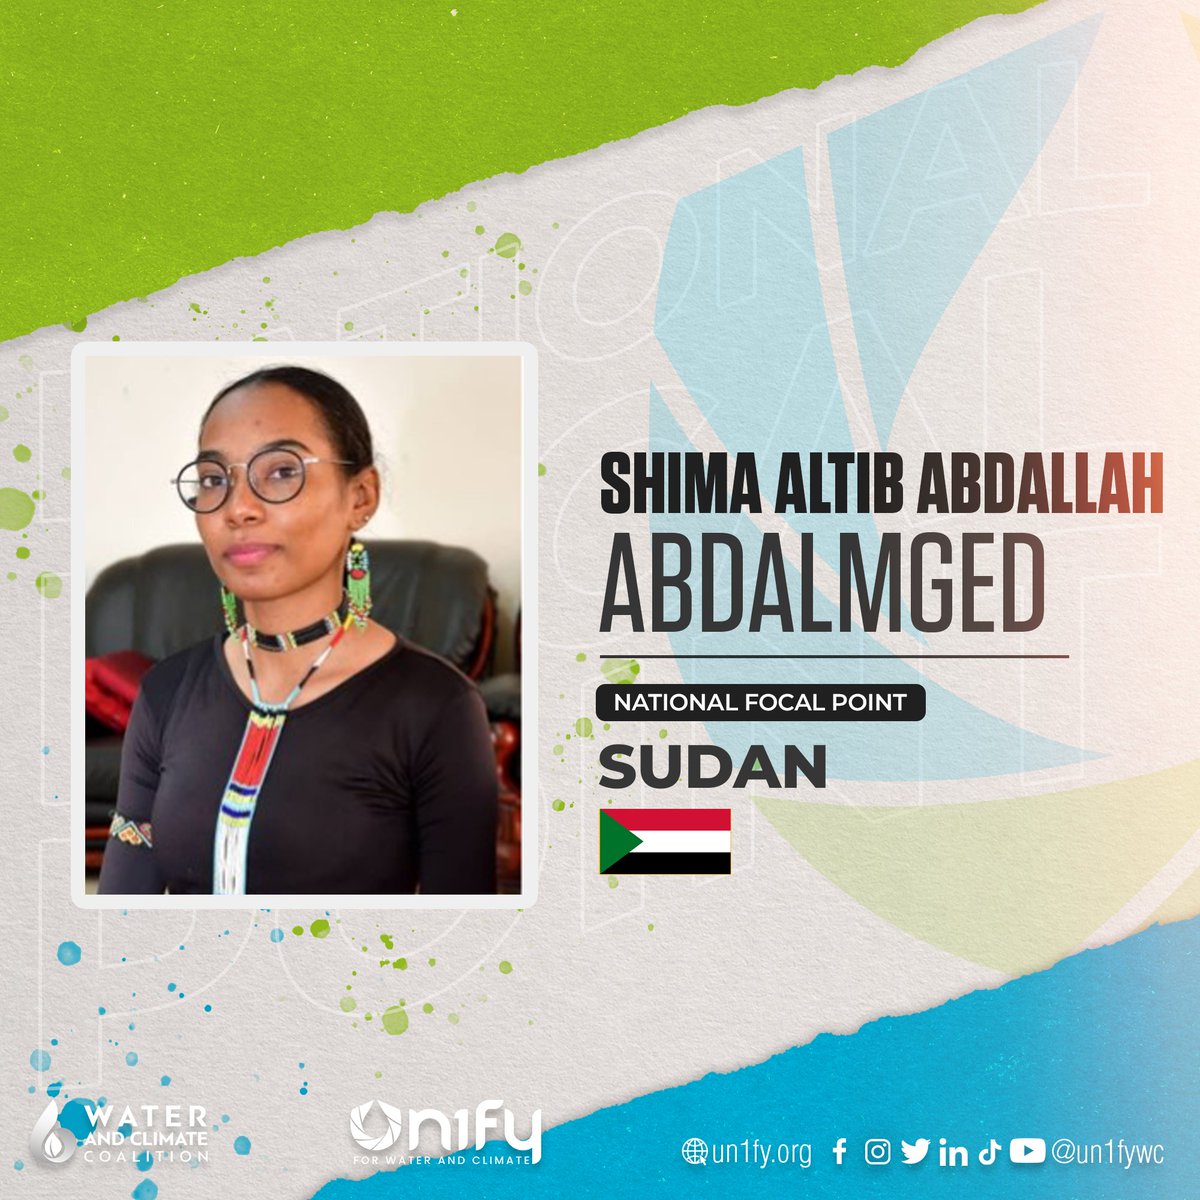 Introducing our National Focal Points for Sudan, Hafiz Ahmed Ibrahim Mohamed & Shima Altib Abdallah Abdalmged. Are you from Sudan and willing to advocate for water and climate? You can reach them via email at sudan@un1fy.org #un2023waterconference #WaterAction  #un1fy #un1fywc